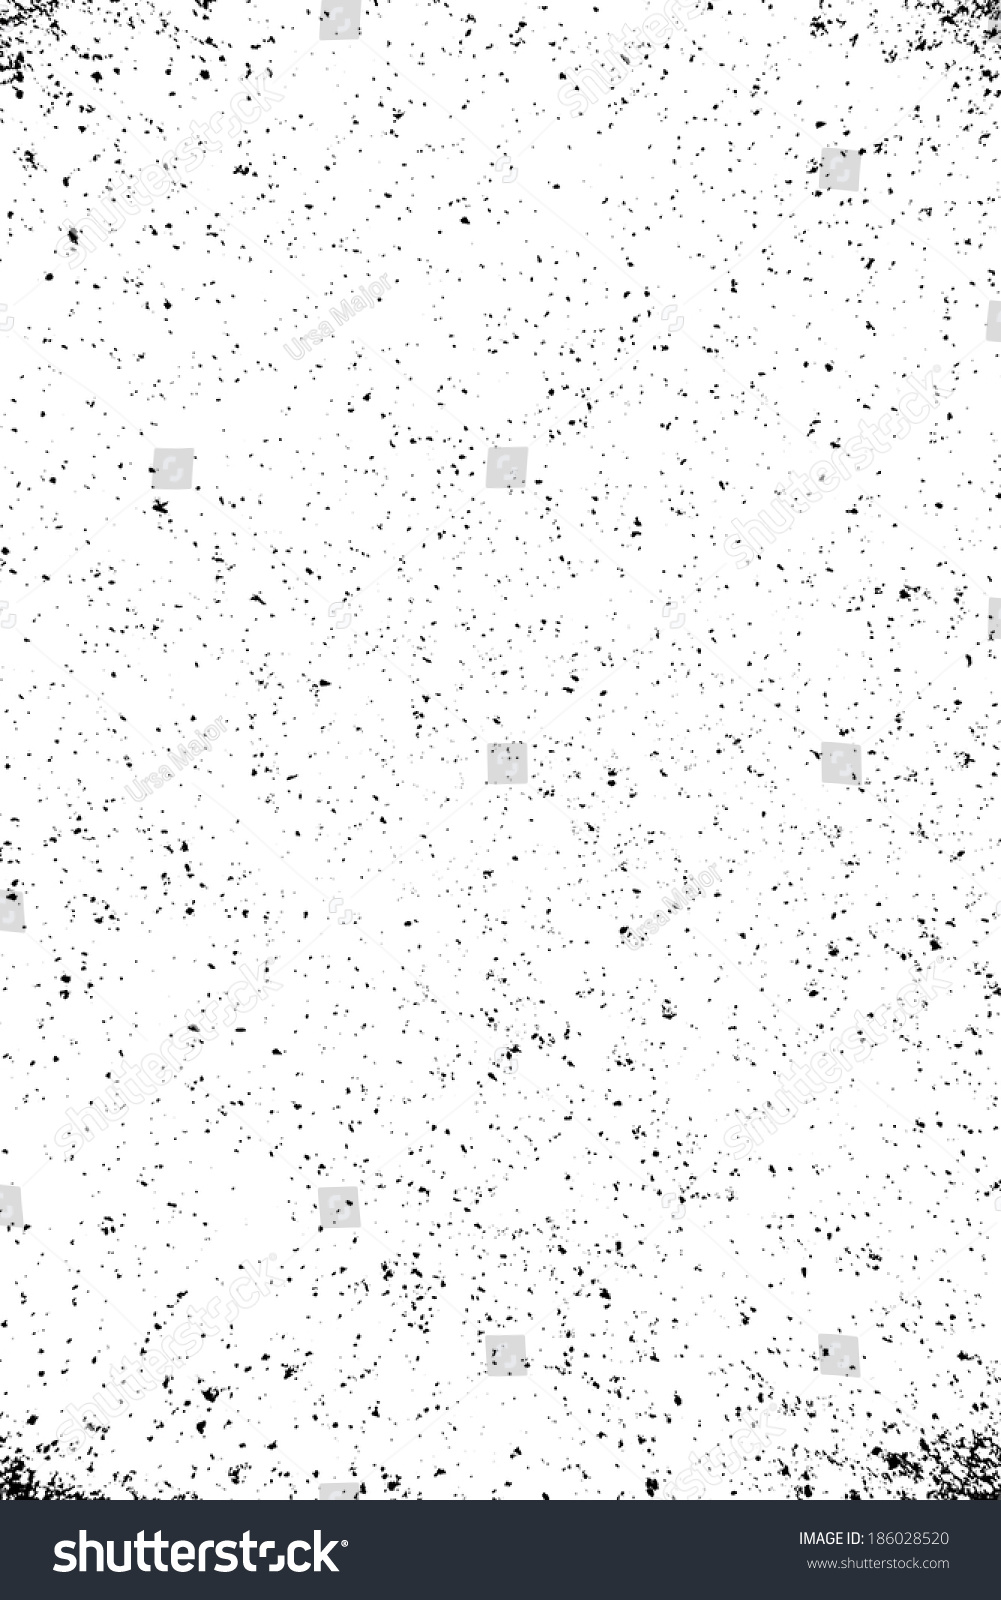 Overlay Dust Grainy Texture Your Design Stock Vector (Royalty Free.